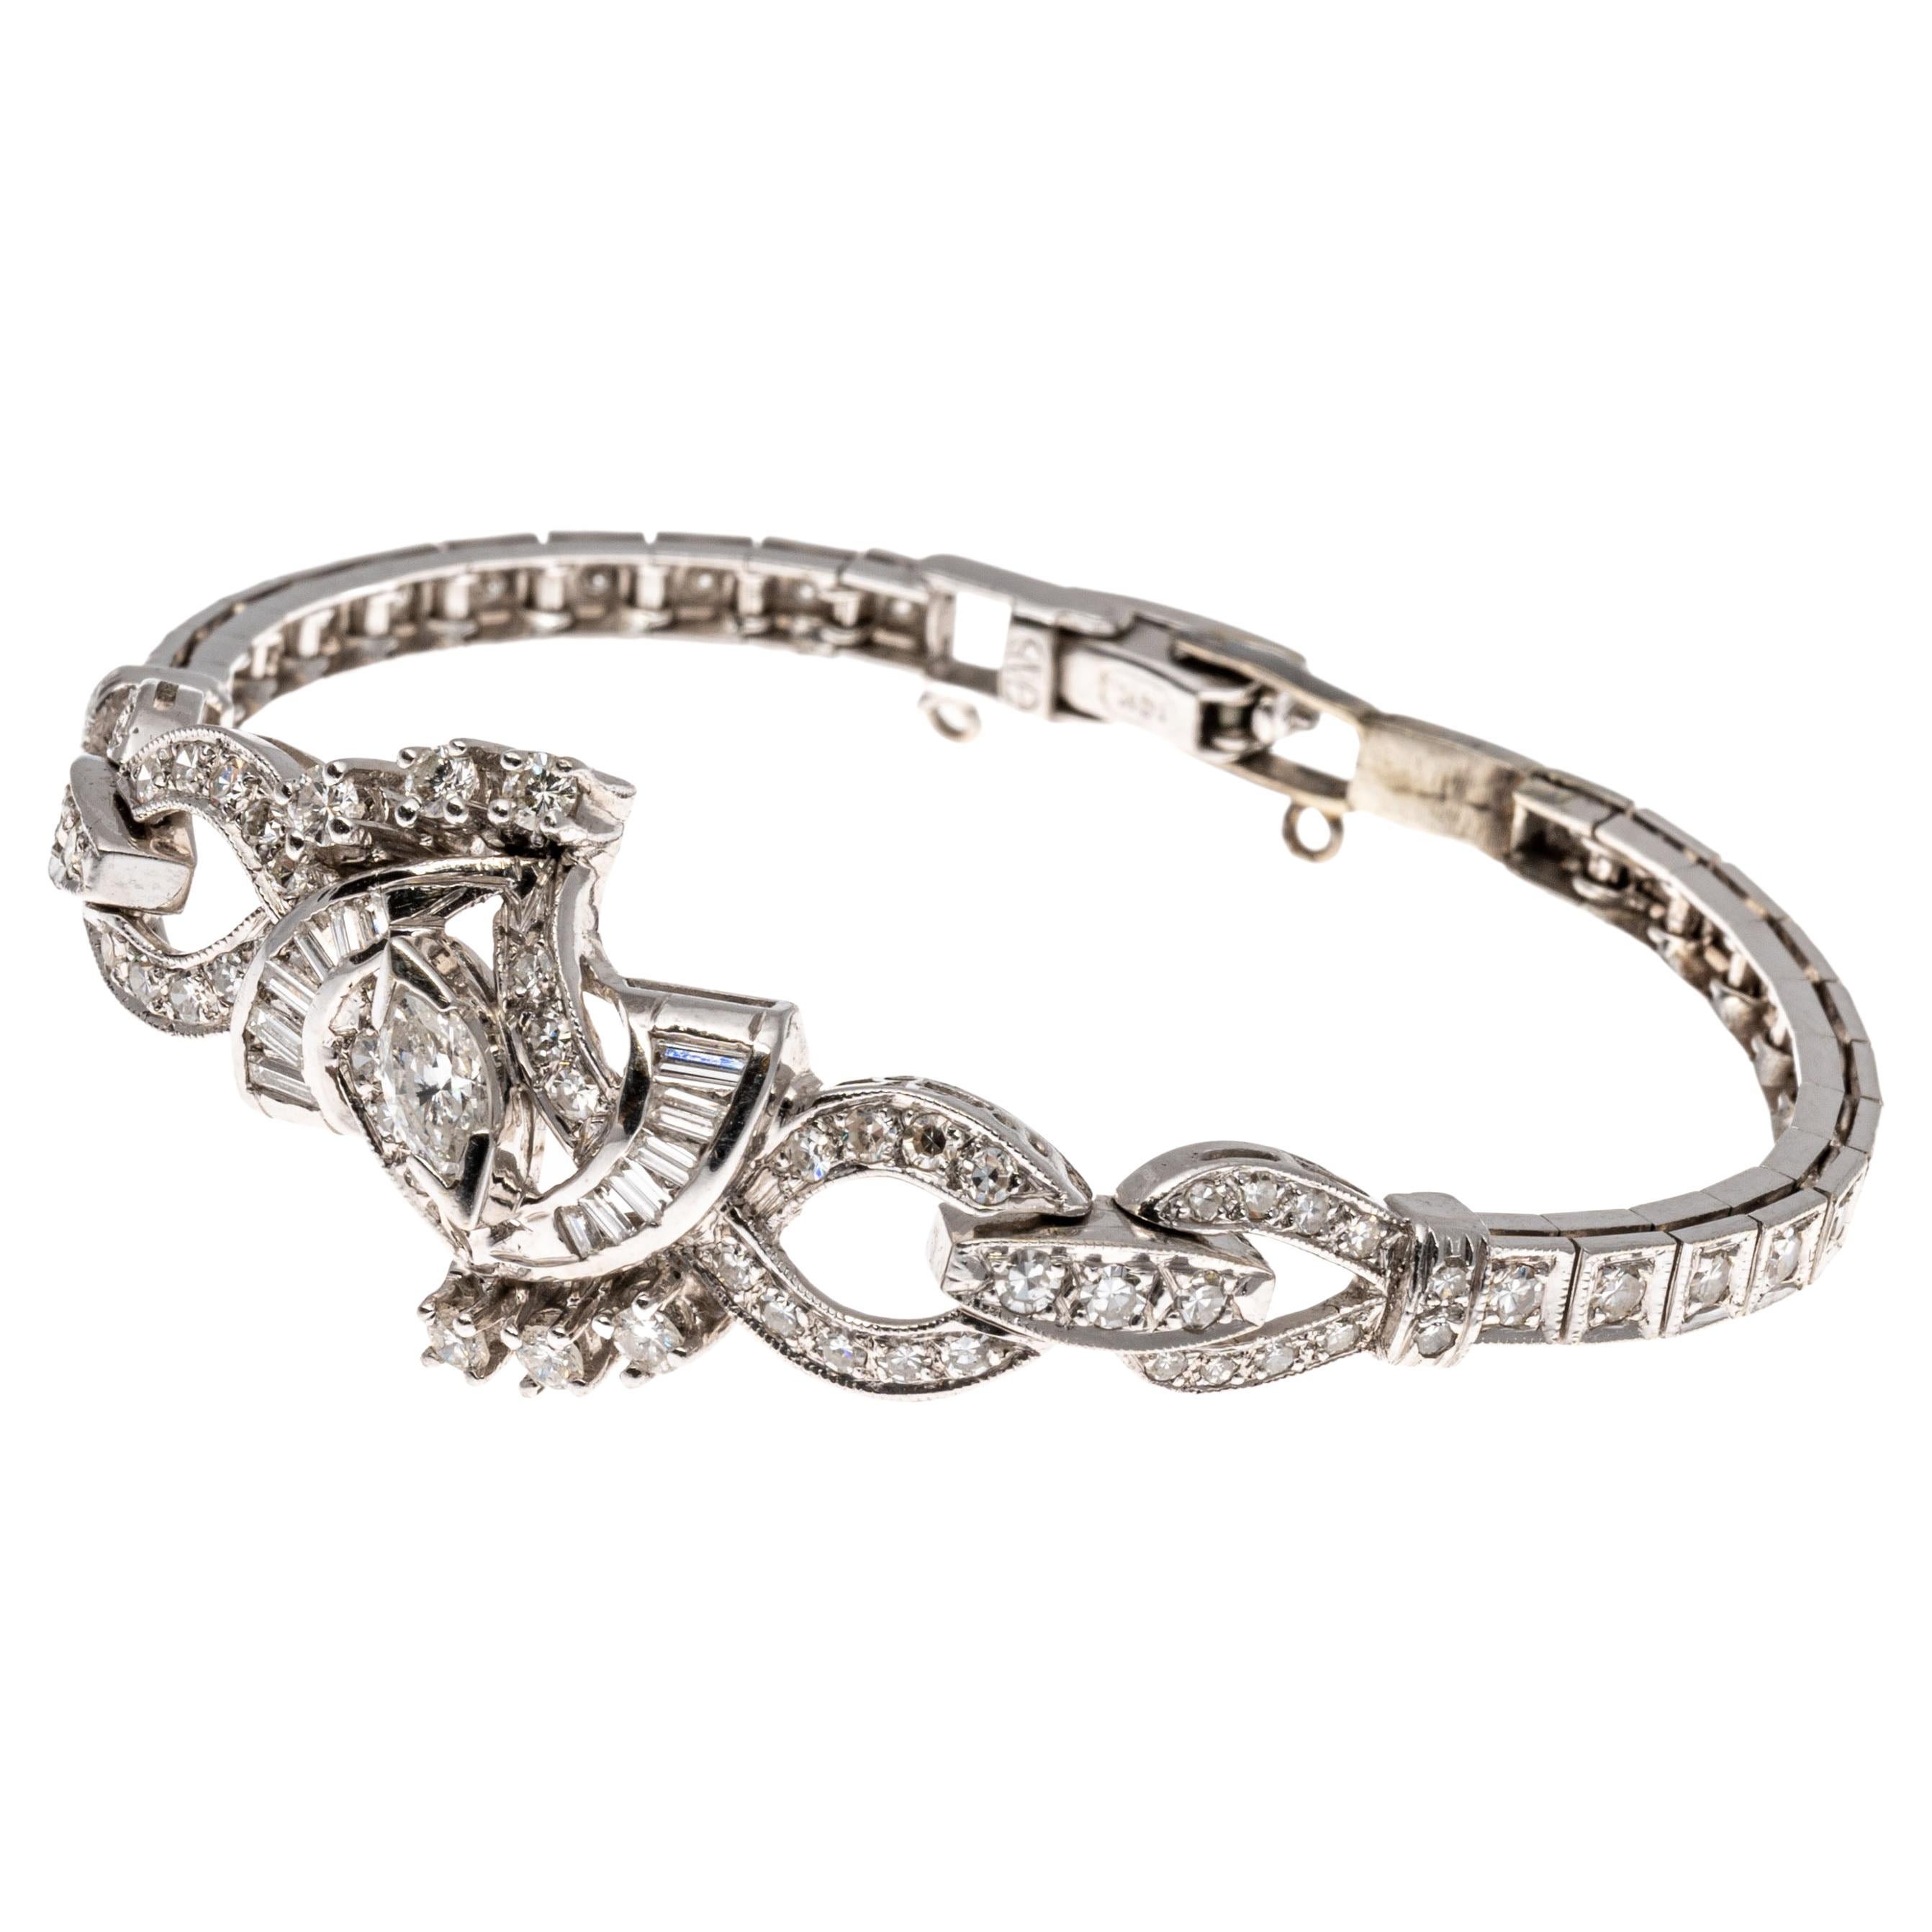 14k Stunning Bracelet, App 1.15 TCW With Marquise, Baguette And Round Diamonds.
This stunning bracelet highlights a center stone which is a marquise brilliant shaped diamond, approximately 0.15 CTS, and set with 